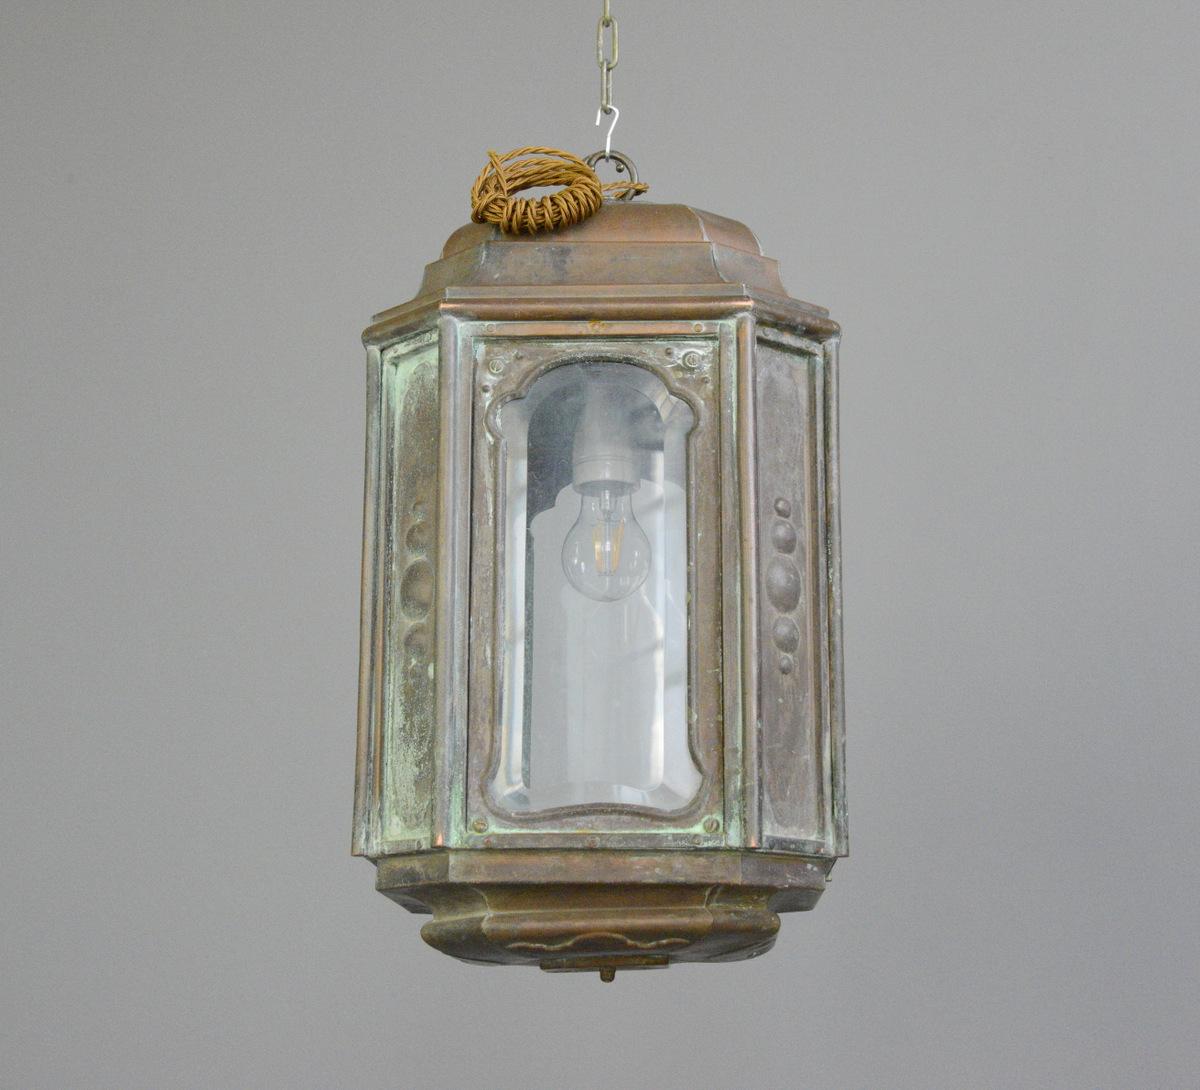 French Art Nouveau copper lantern, circa 1900

- Ornate copper casing
- 4 windows, 2 with beveled glass, 2 with flat glass
- Takes E27 fitting bulbs
- French, 1900
- Measures: 58cm tall x 30cm wide x 30cm deep

Condition report:

Fully